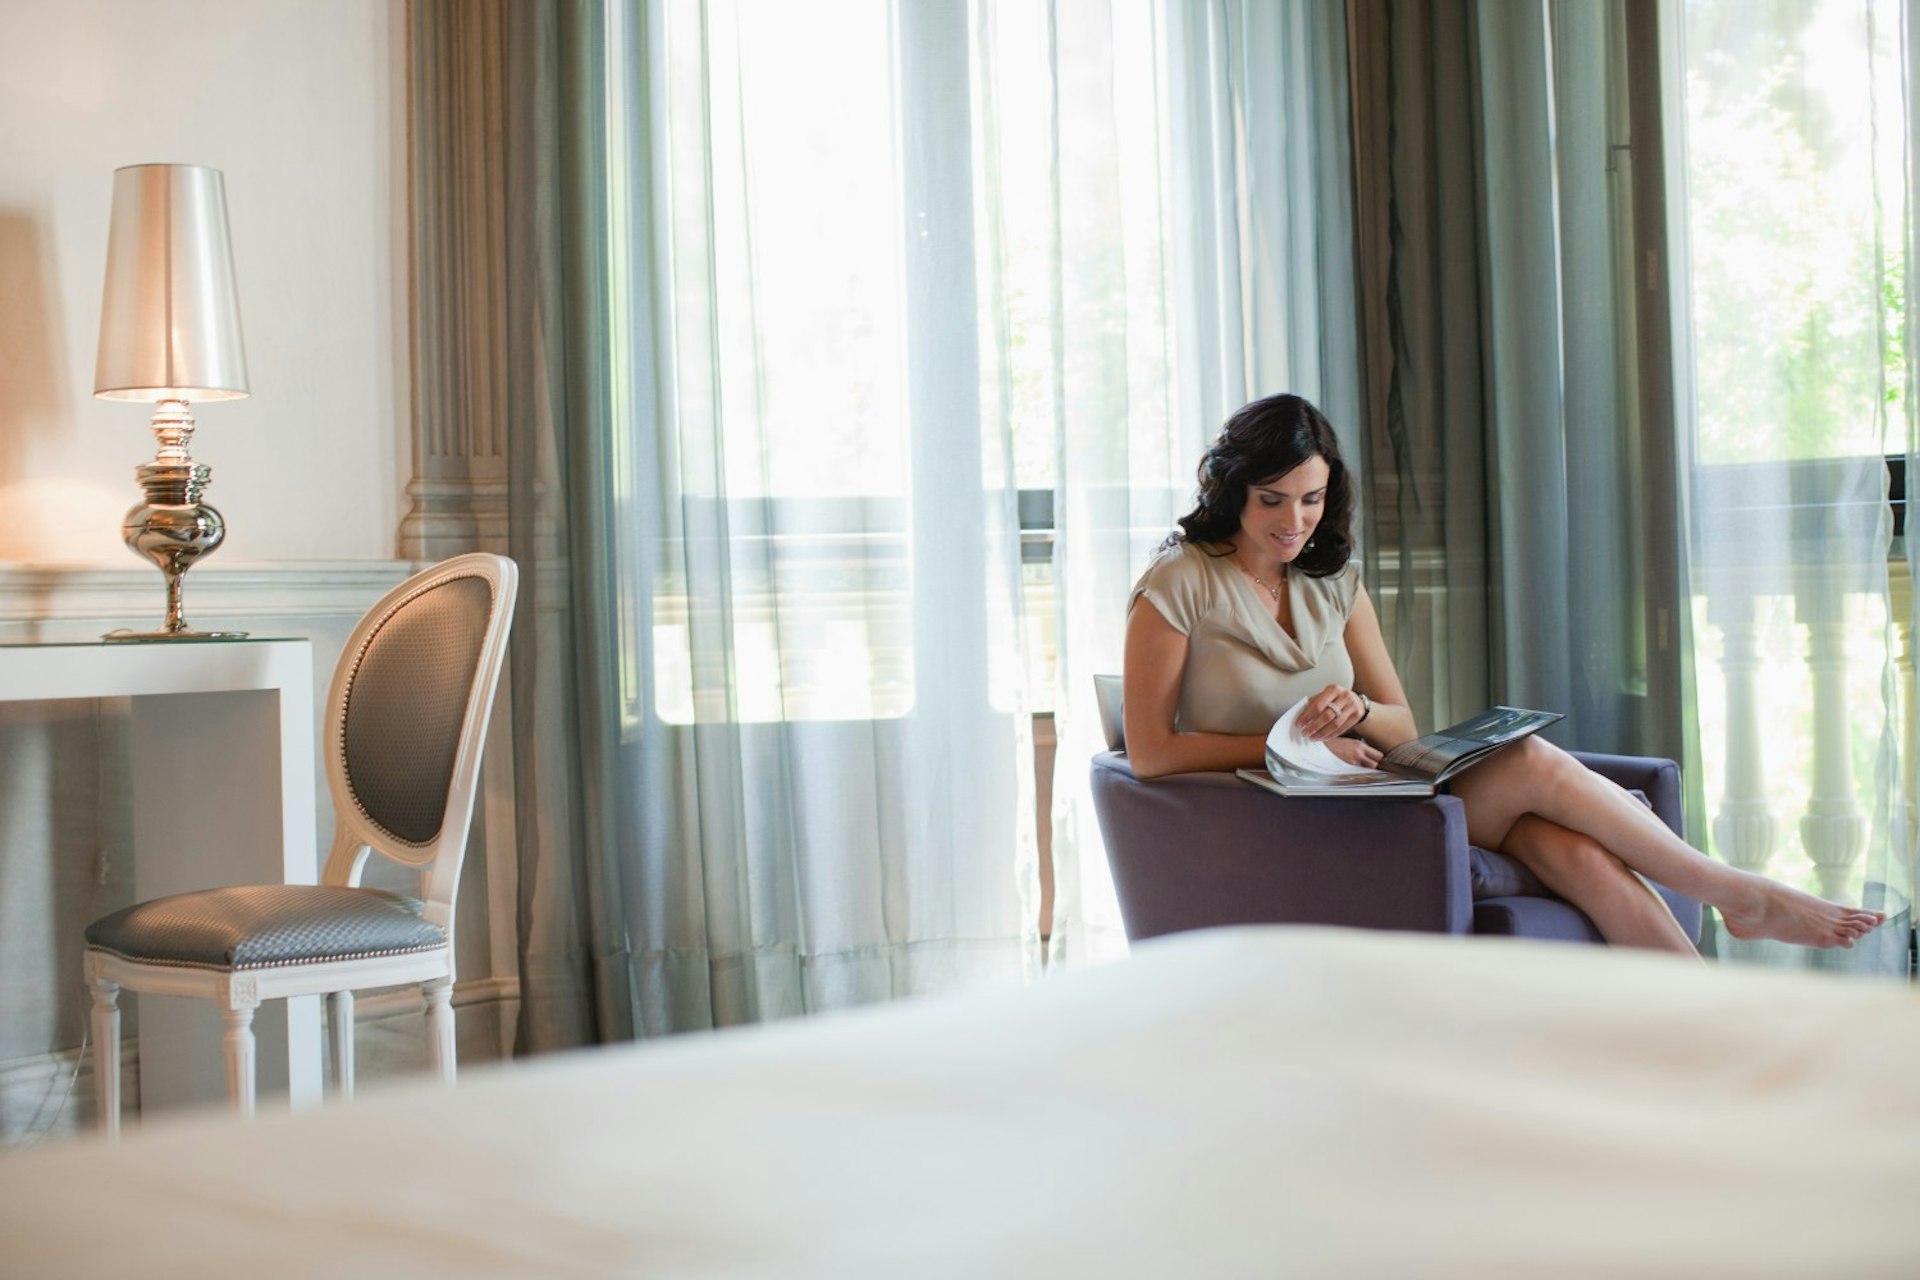 A woman reading a magazine in a hotel room